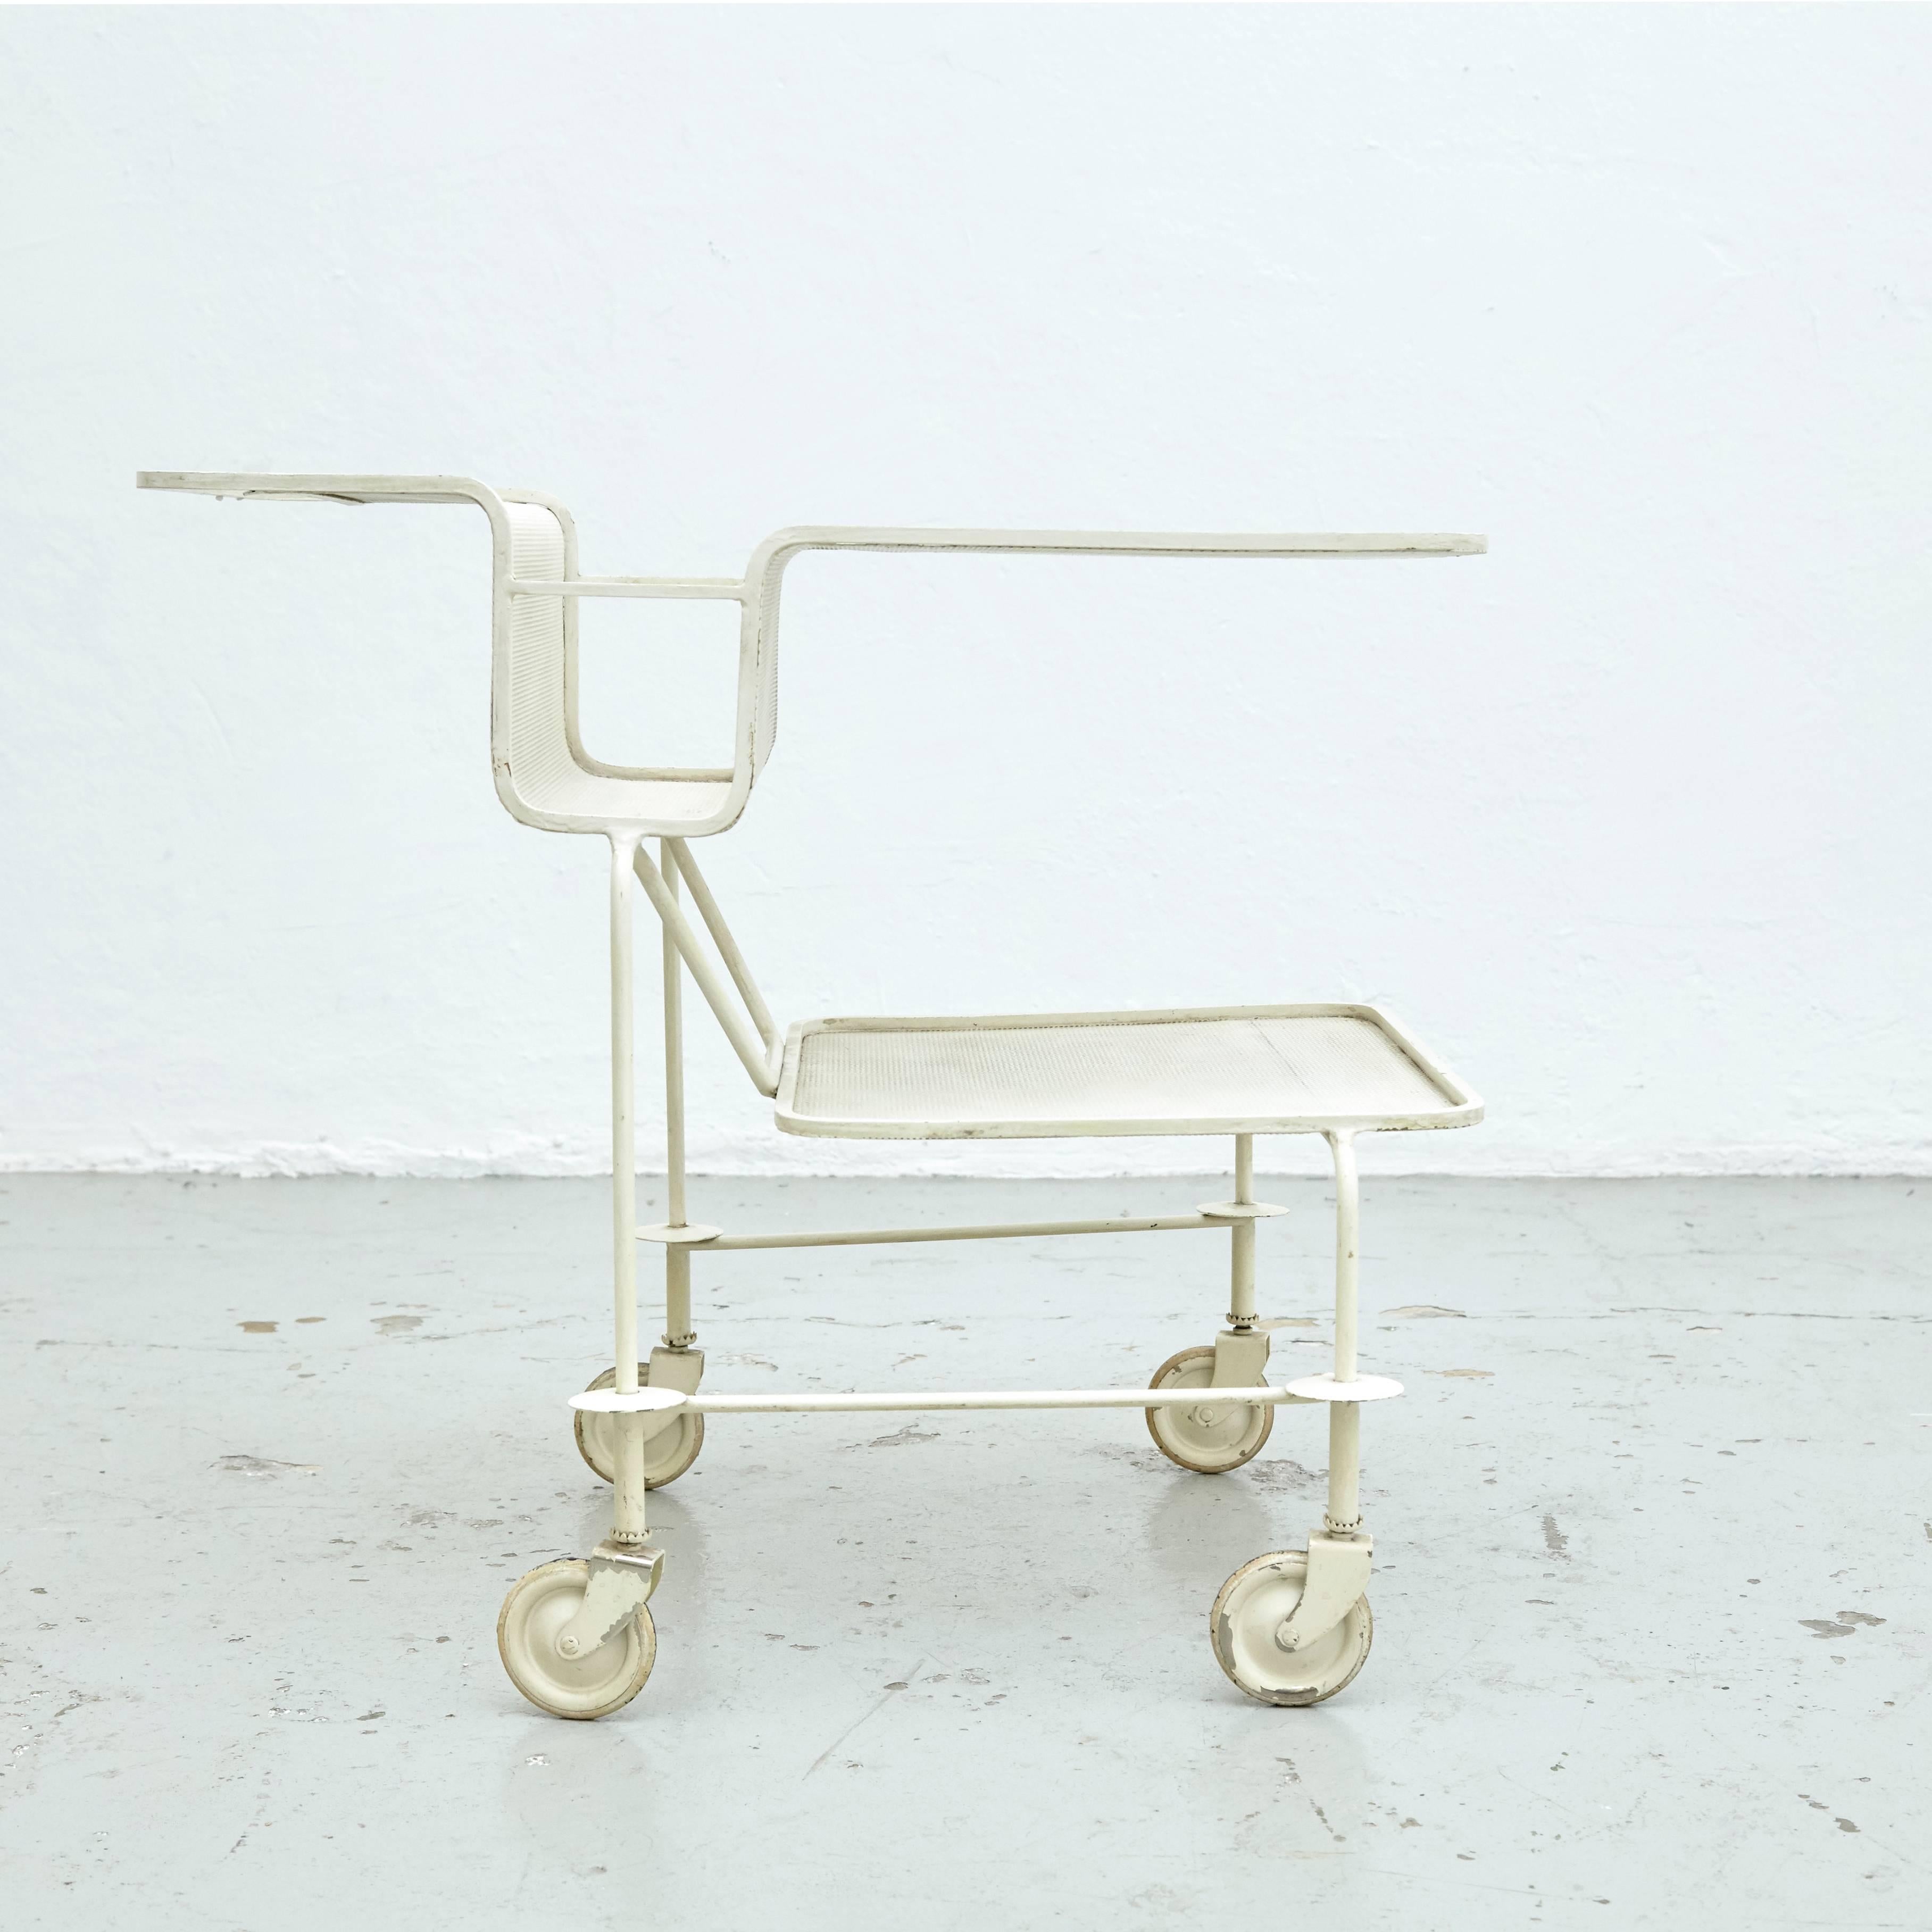 Trolley designed by Mathieu Matégot. 
Manufactured by Ateliers Matégot (France), circa 1950. 

Folded, perforated metal lacquered in white. 

In original condition, with minor wear consistent with age and use, preserving a beautiful patina,